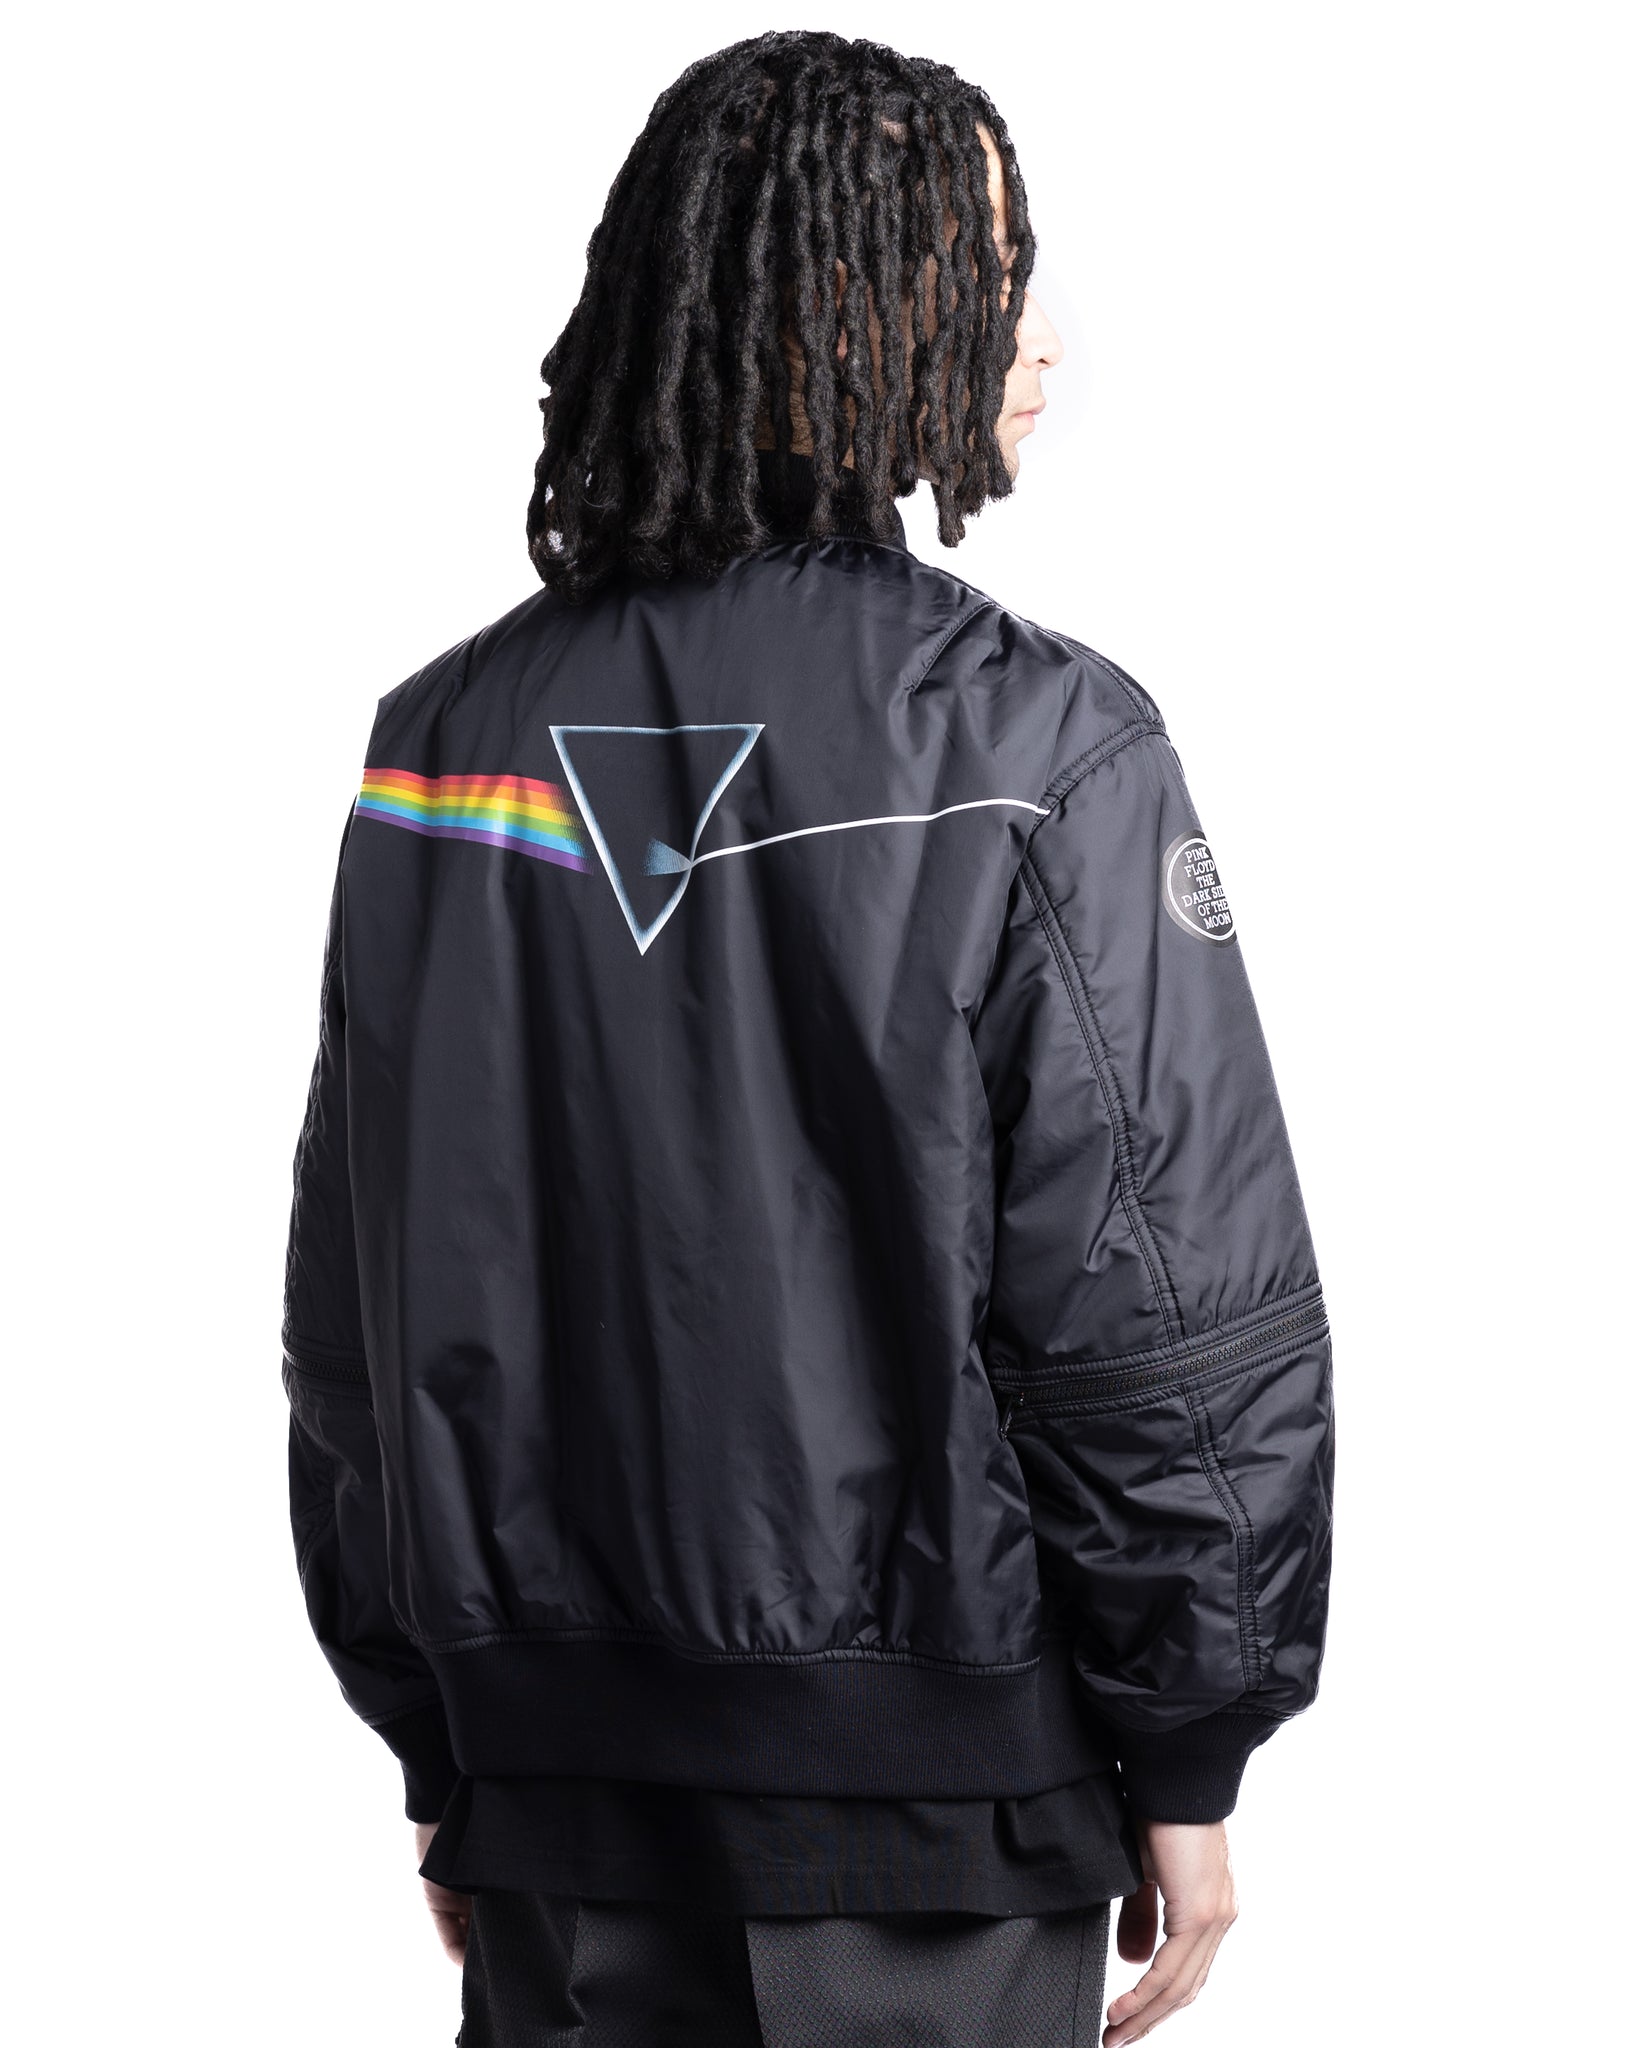 Undercover UC1C4207-1 Pink Floyd Convertible Bomber Black